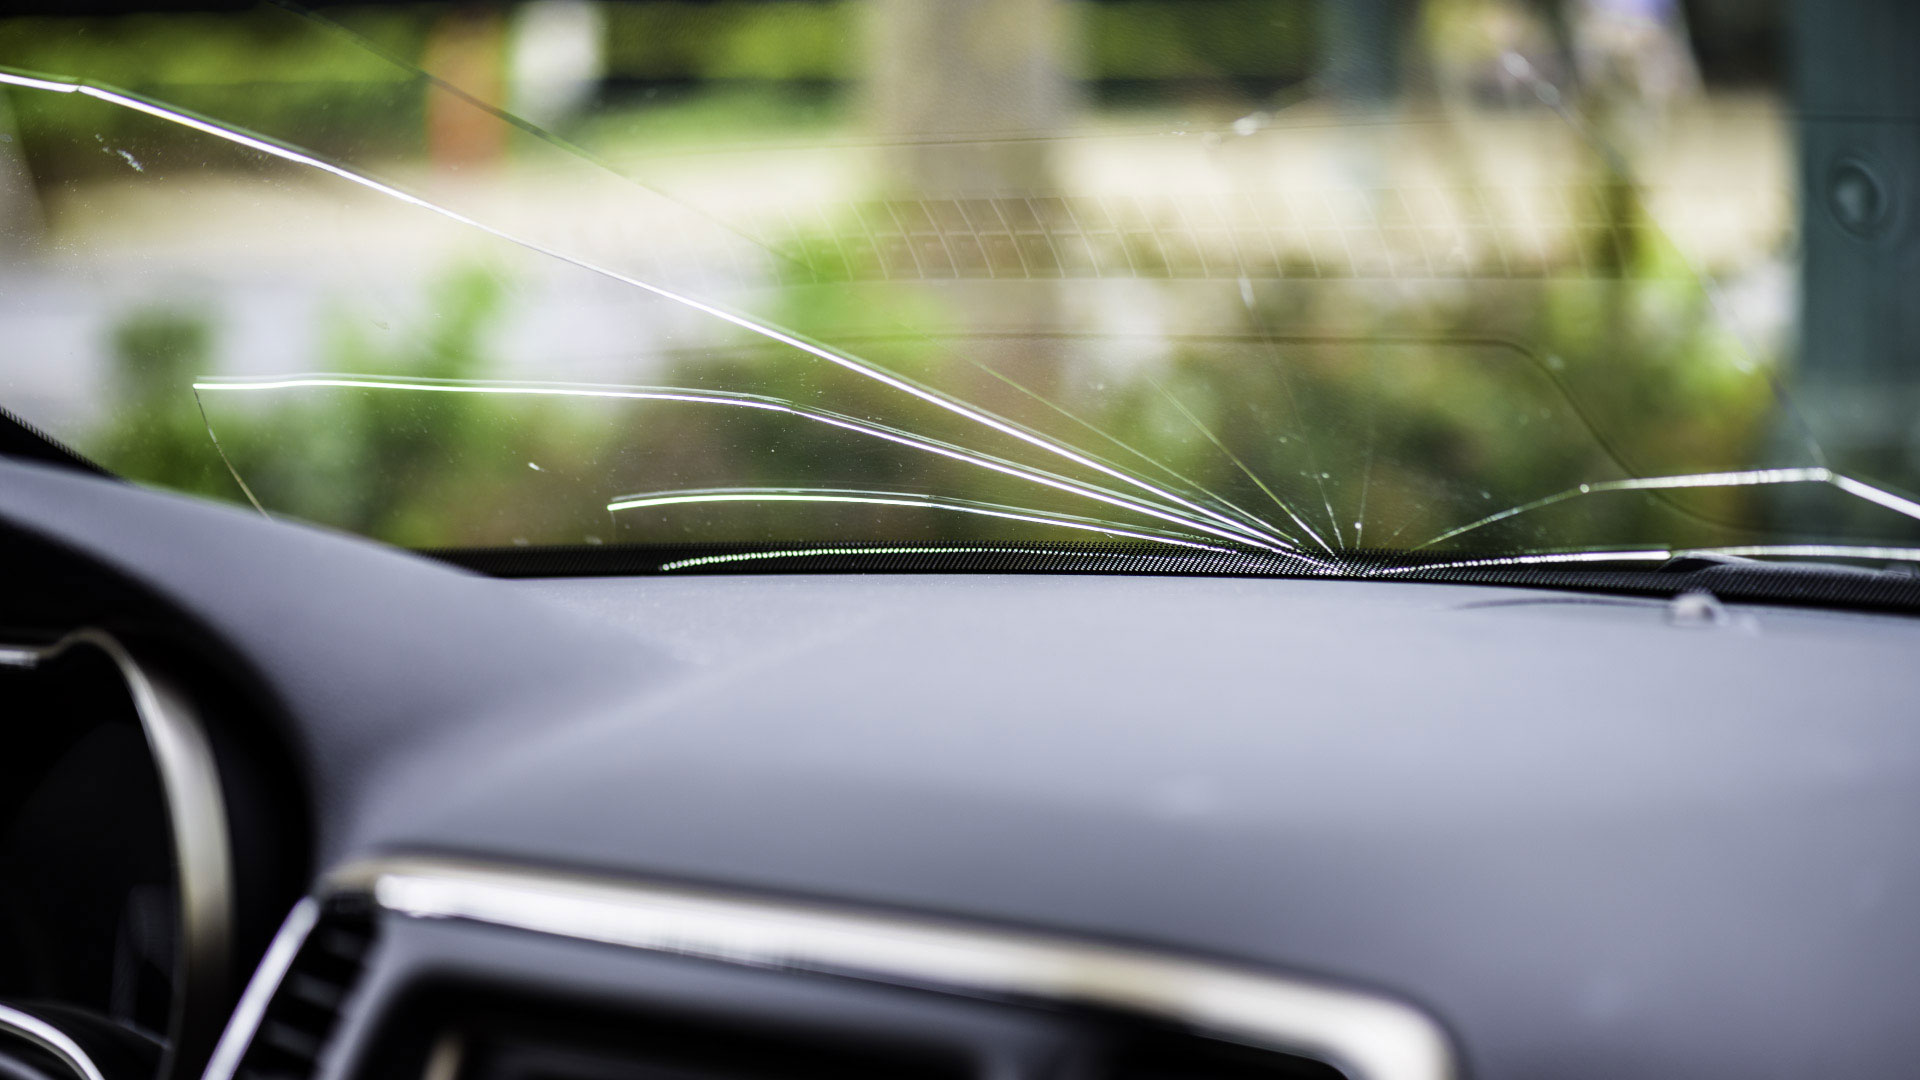 Windshield Replacement and Repair